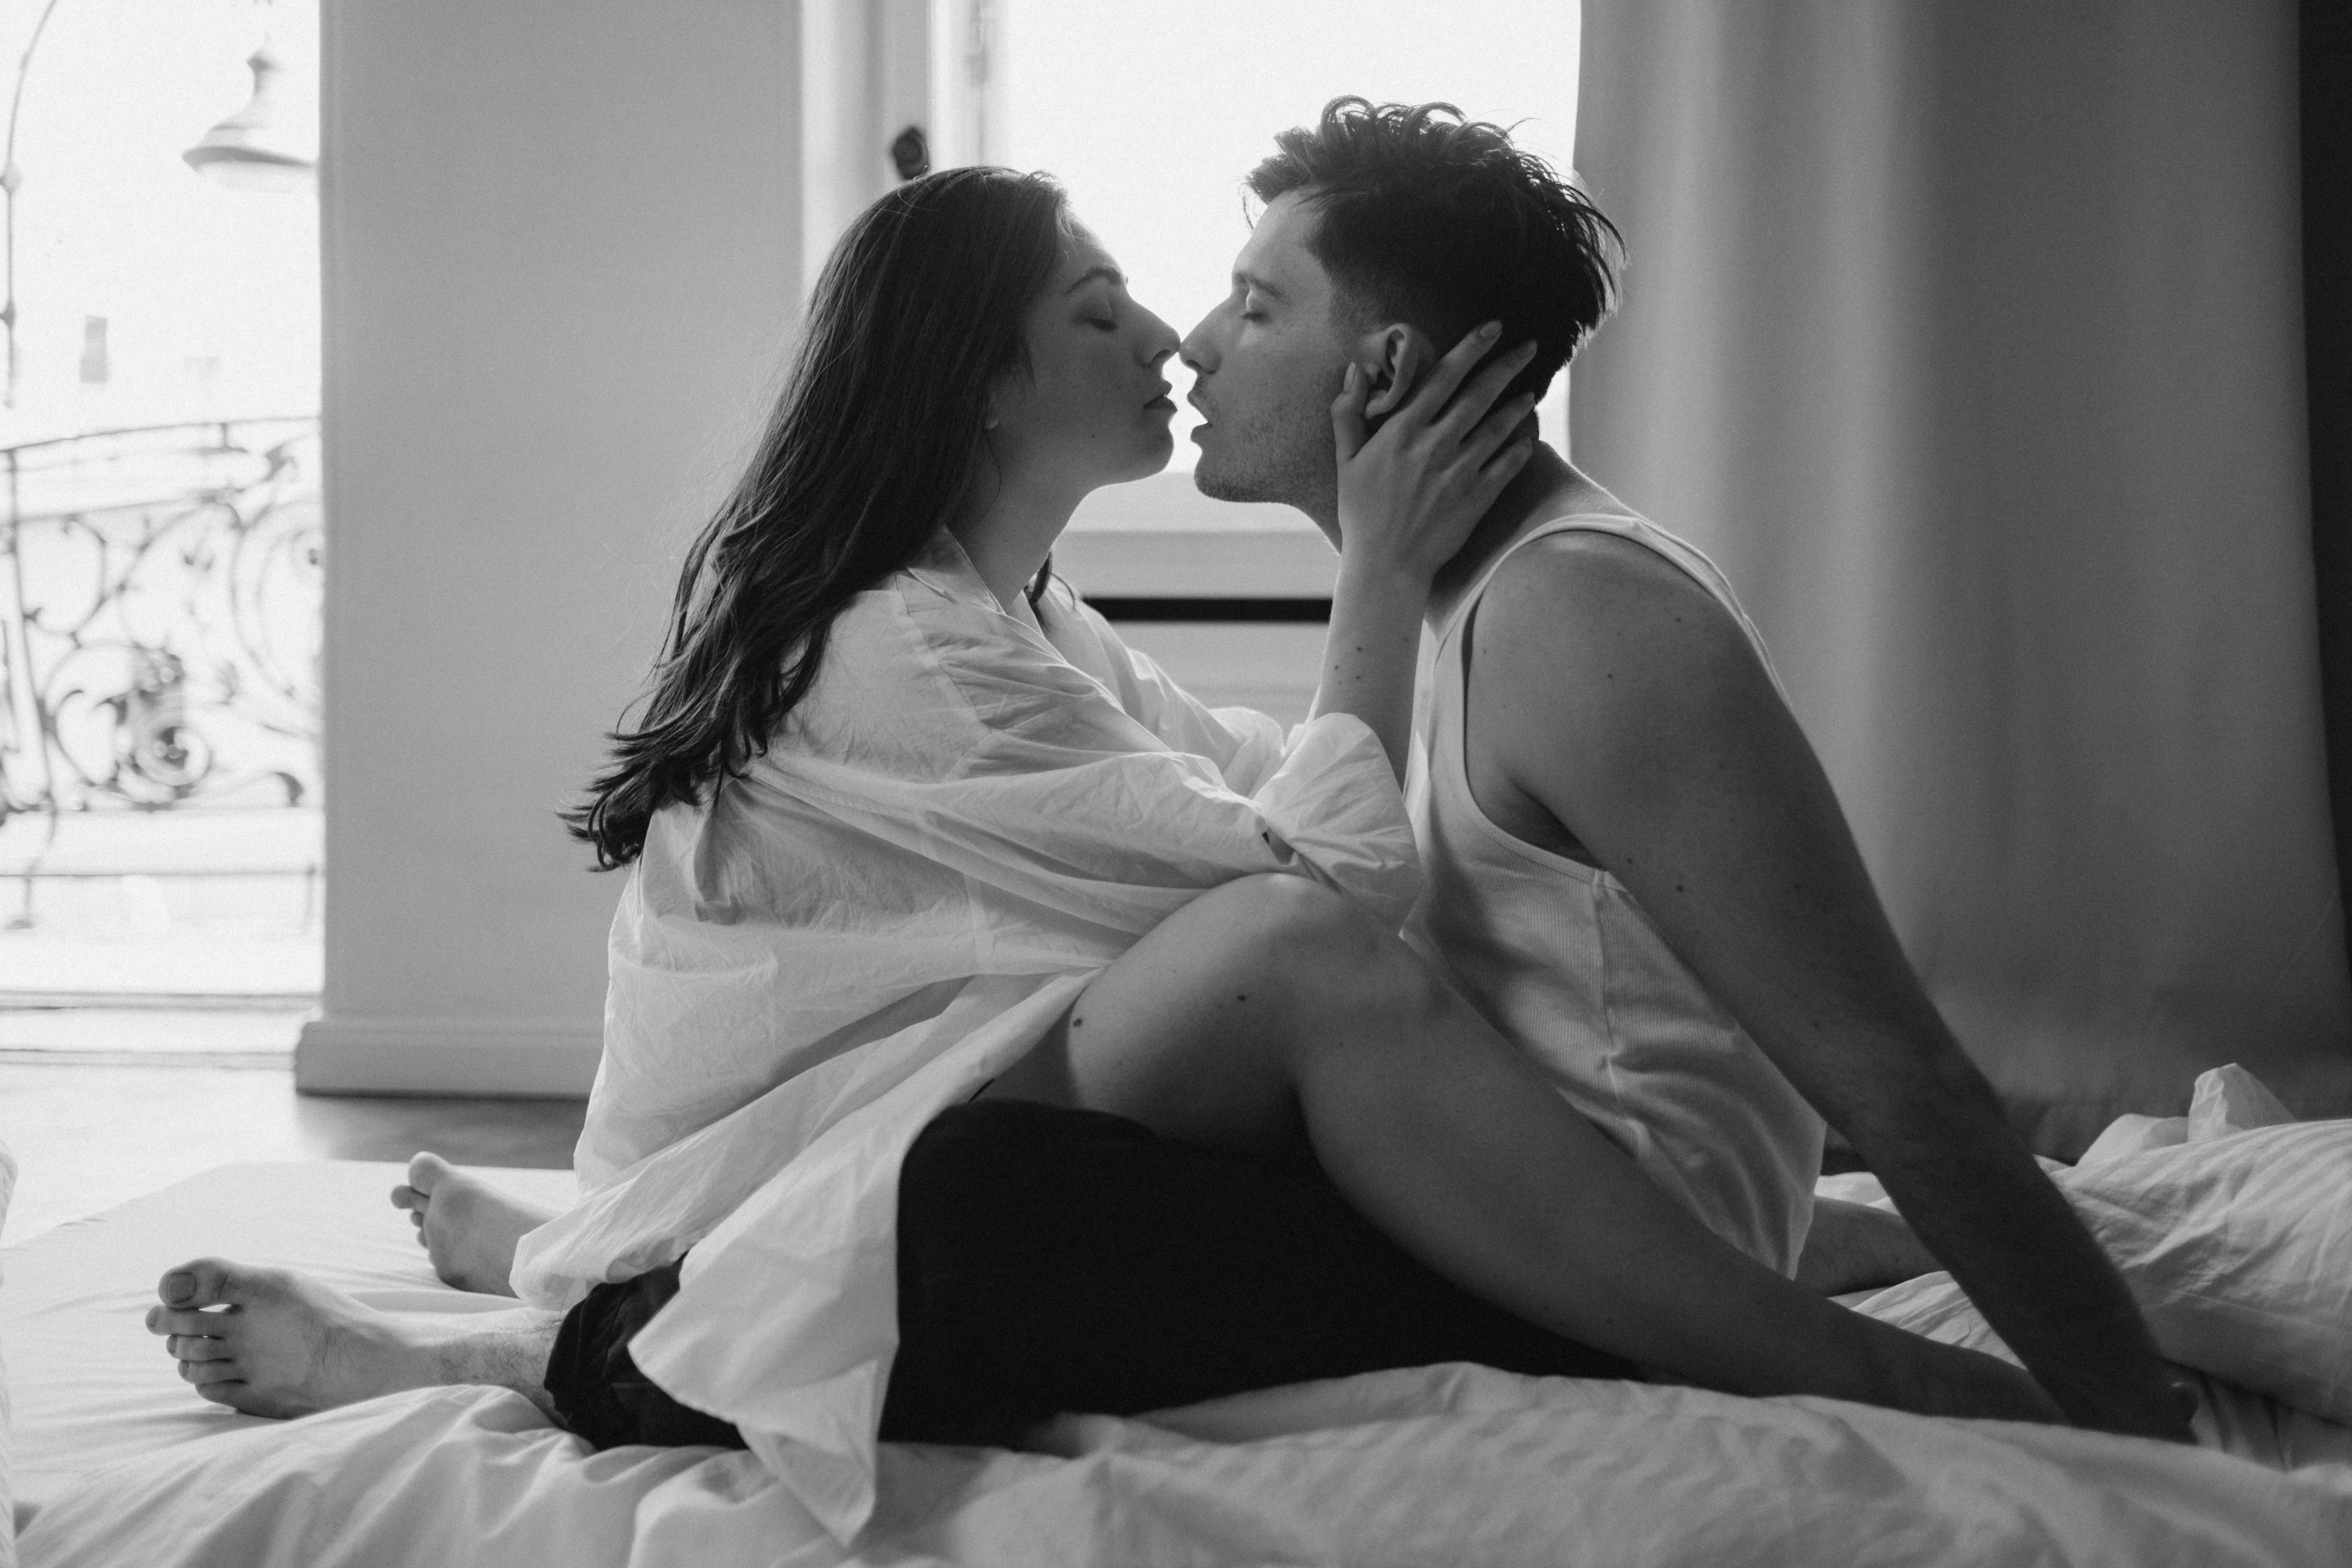 An intertwined couple about to share a kiss in bed | Source: Pexels